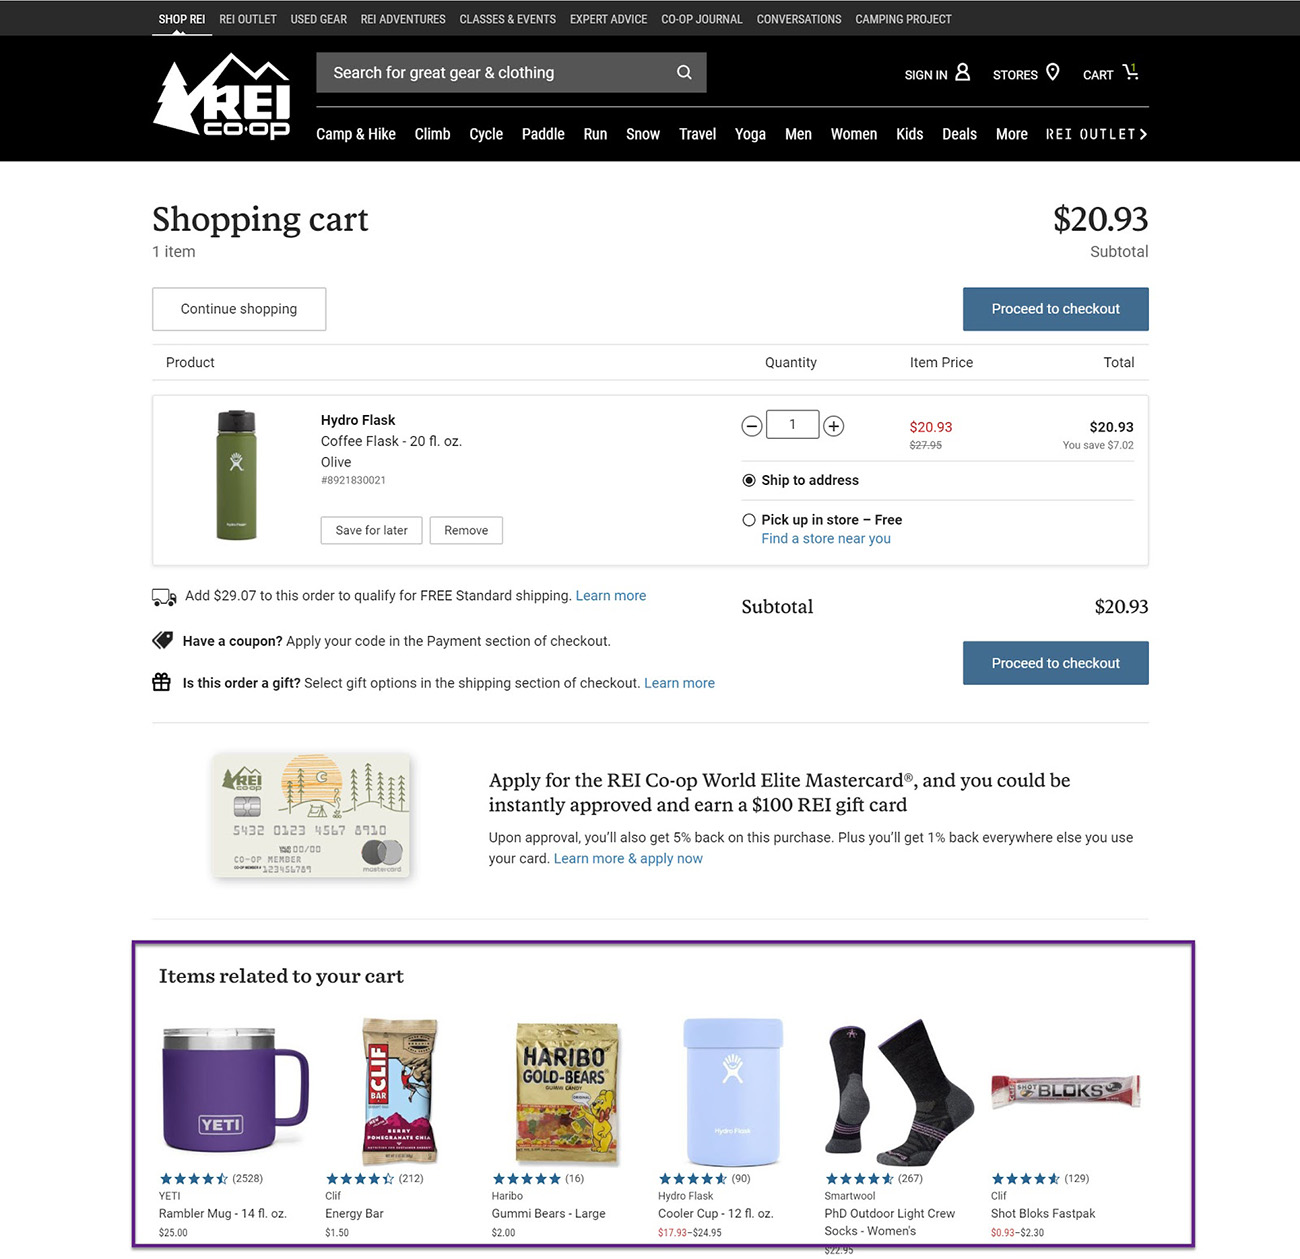 Example of a checkout page on REI's website